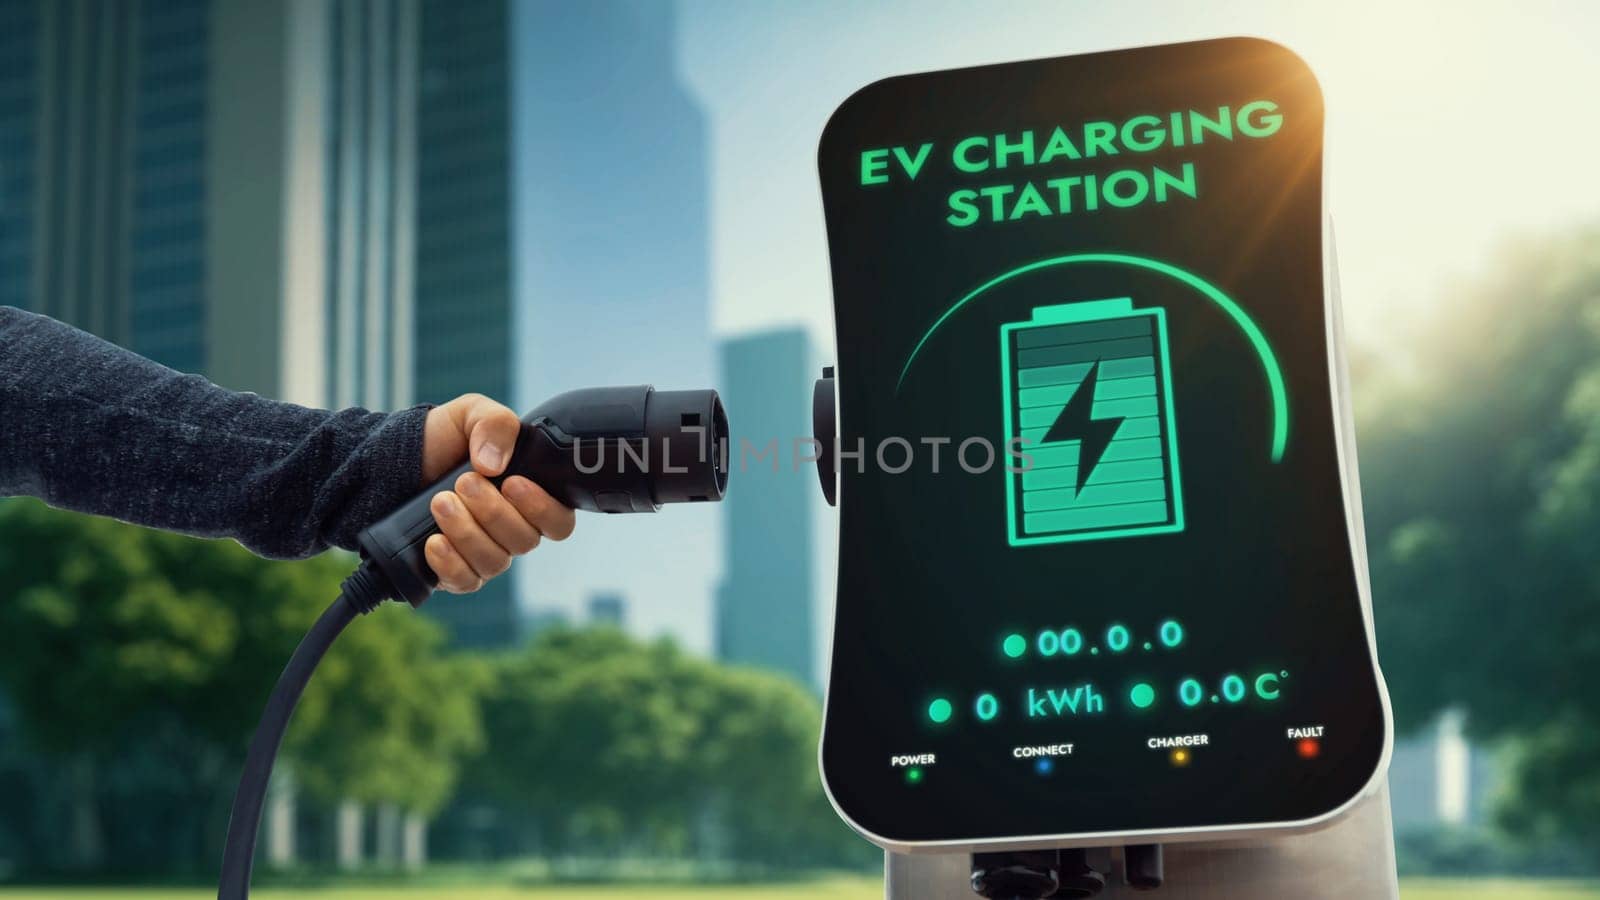 Businessman pull EV charger to recharge his electric car's battery from charging station in green eco city park background. Future innovative EV car and energy sustainability. Peruse